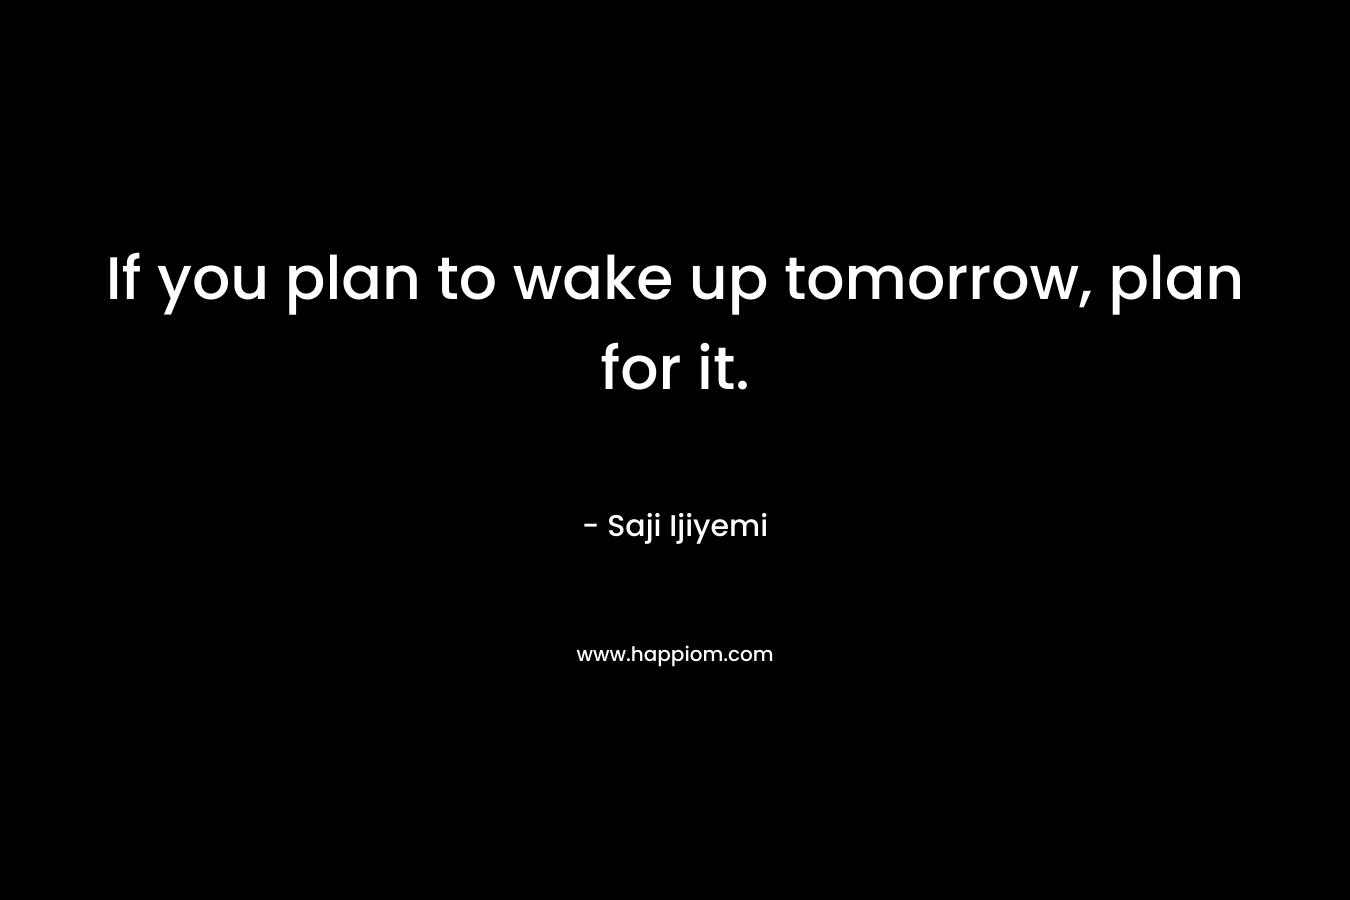 If you plan to wake up tomorrow, plan for it.